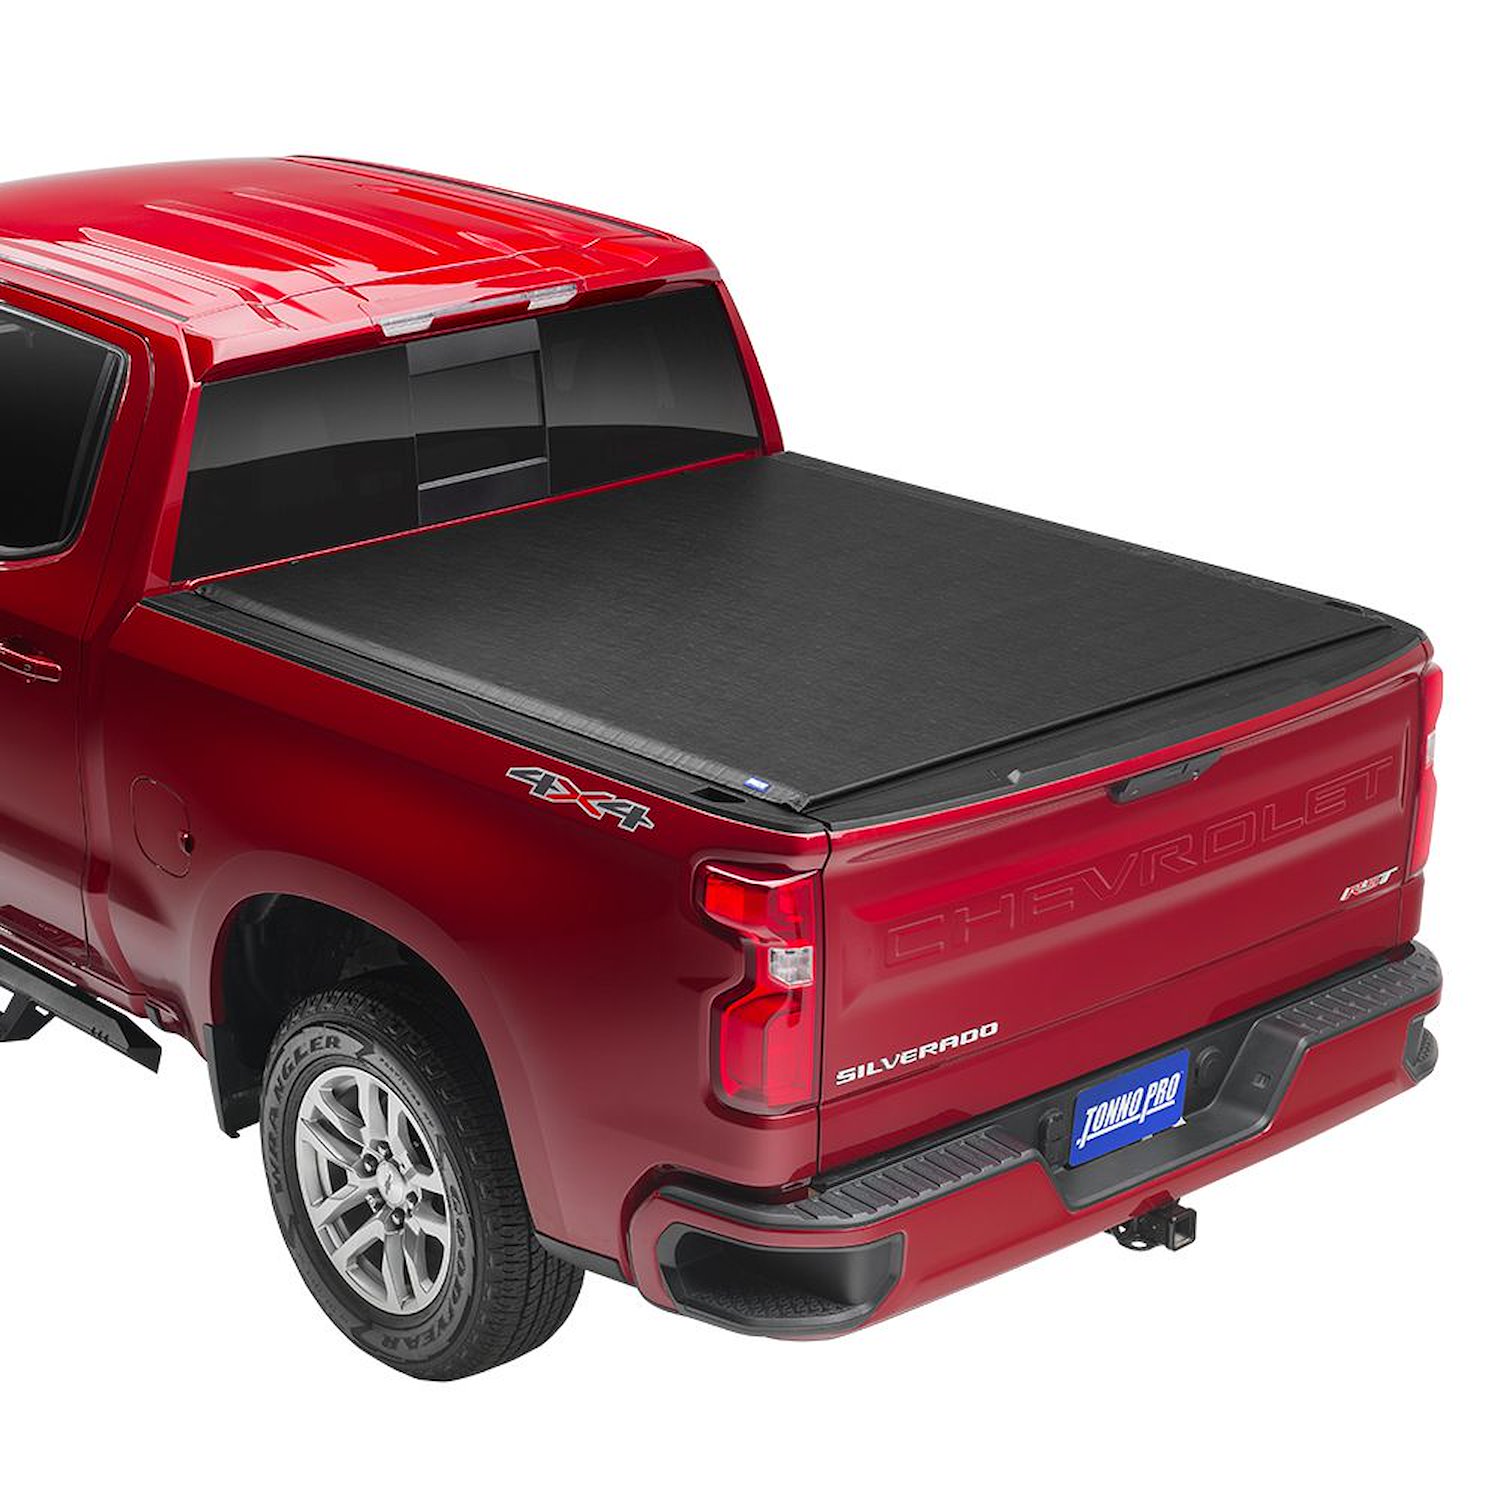 Lo-Roll Roll-Up Tonneau Cover Fits Select Ram Pickup 1500